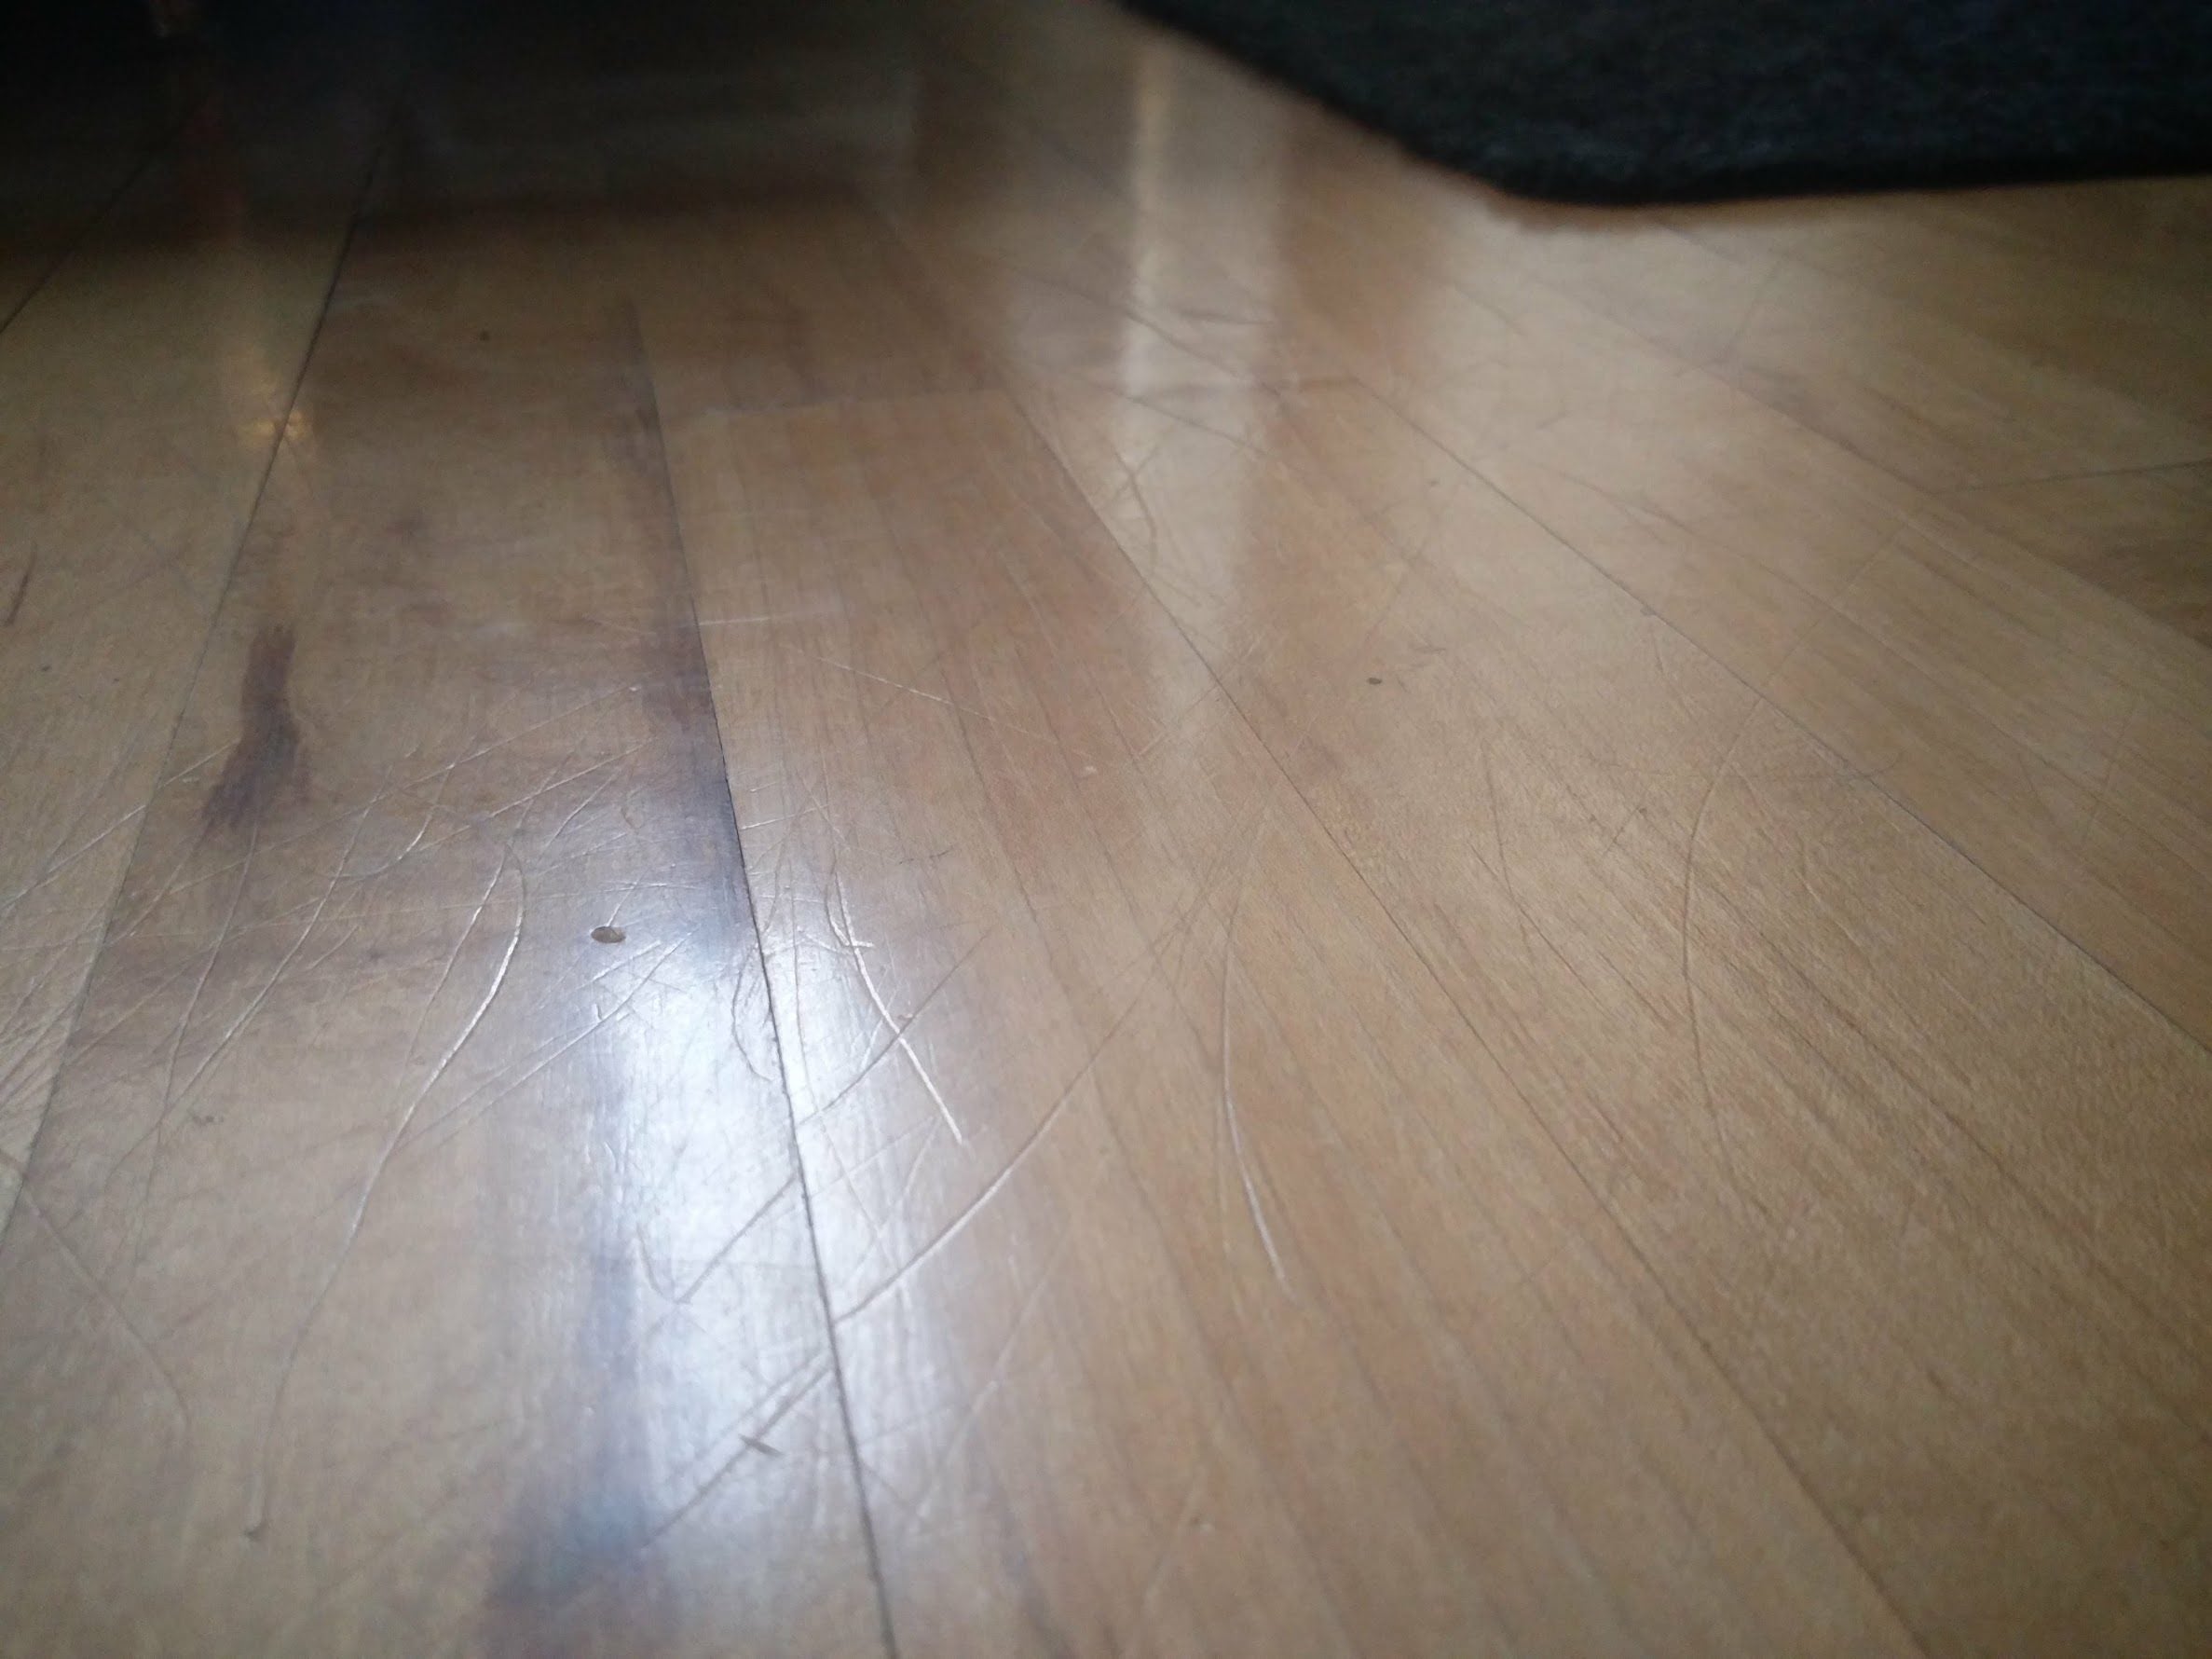 Remove Dog Nail Scratches From Hardwood, Will Dog’s Nails Scratch Hardwood Floors